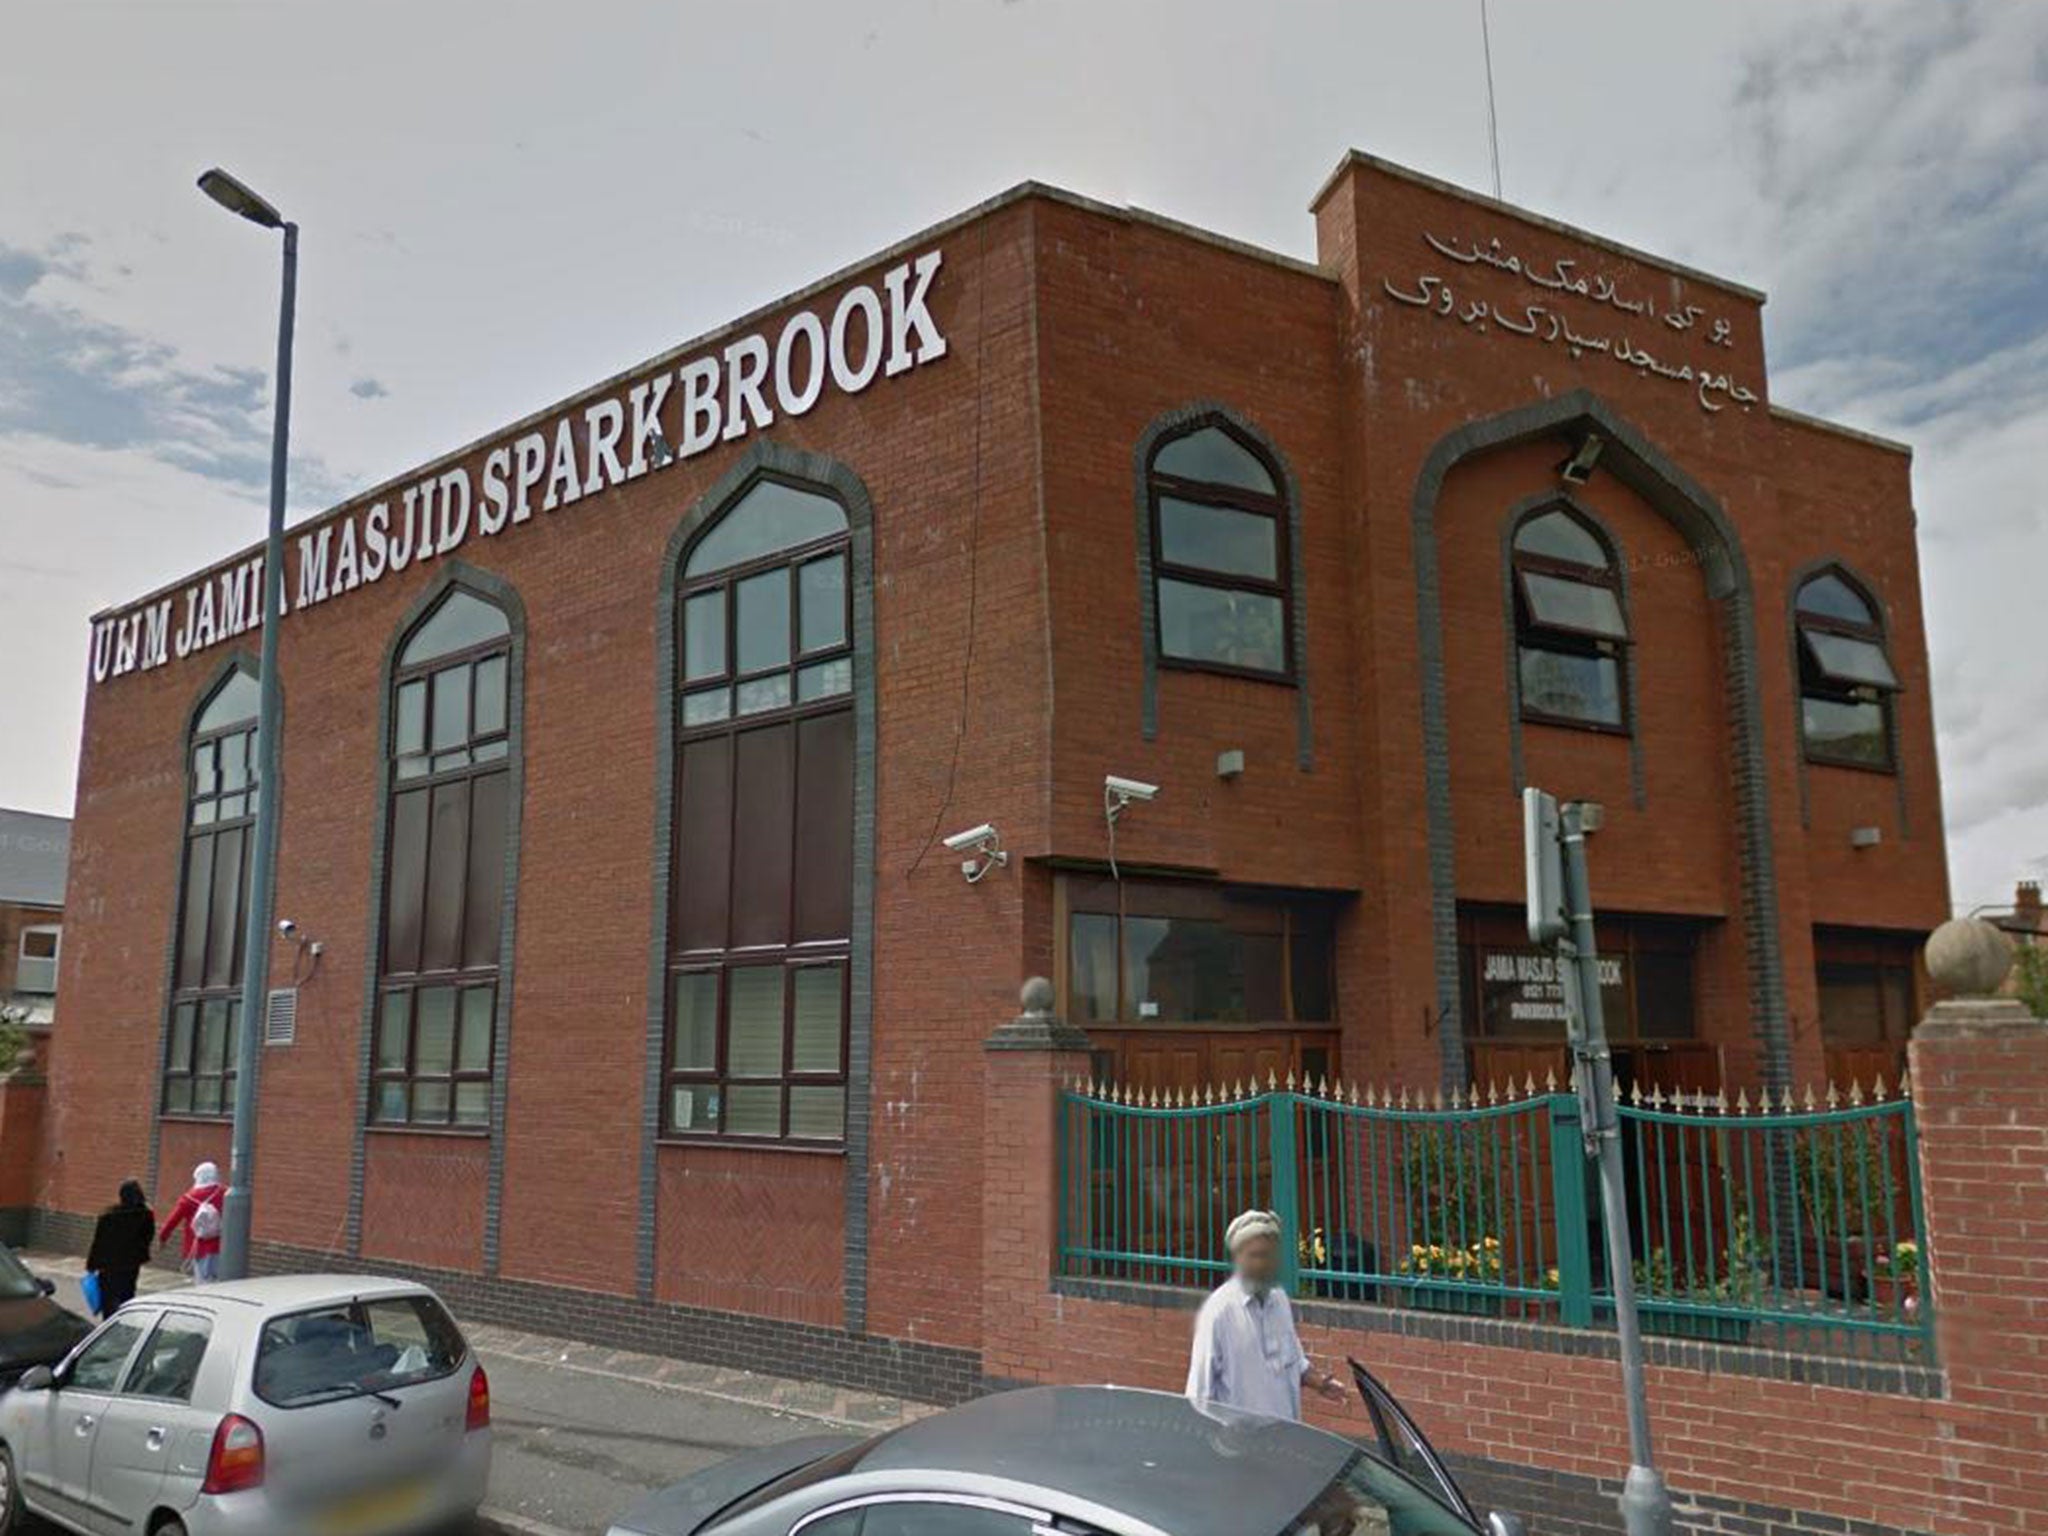 The alleged abuse happened at the Jamia Mosque in Sparkbrook, Birmingham